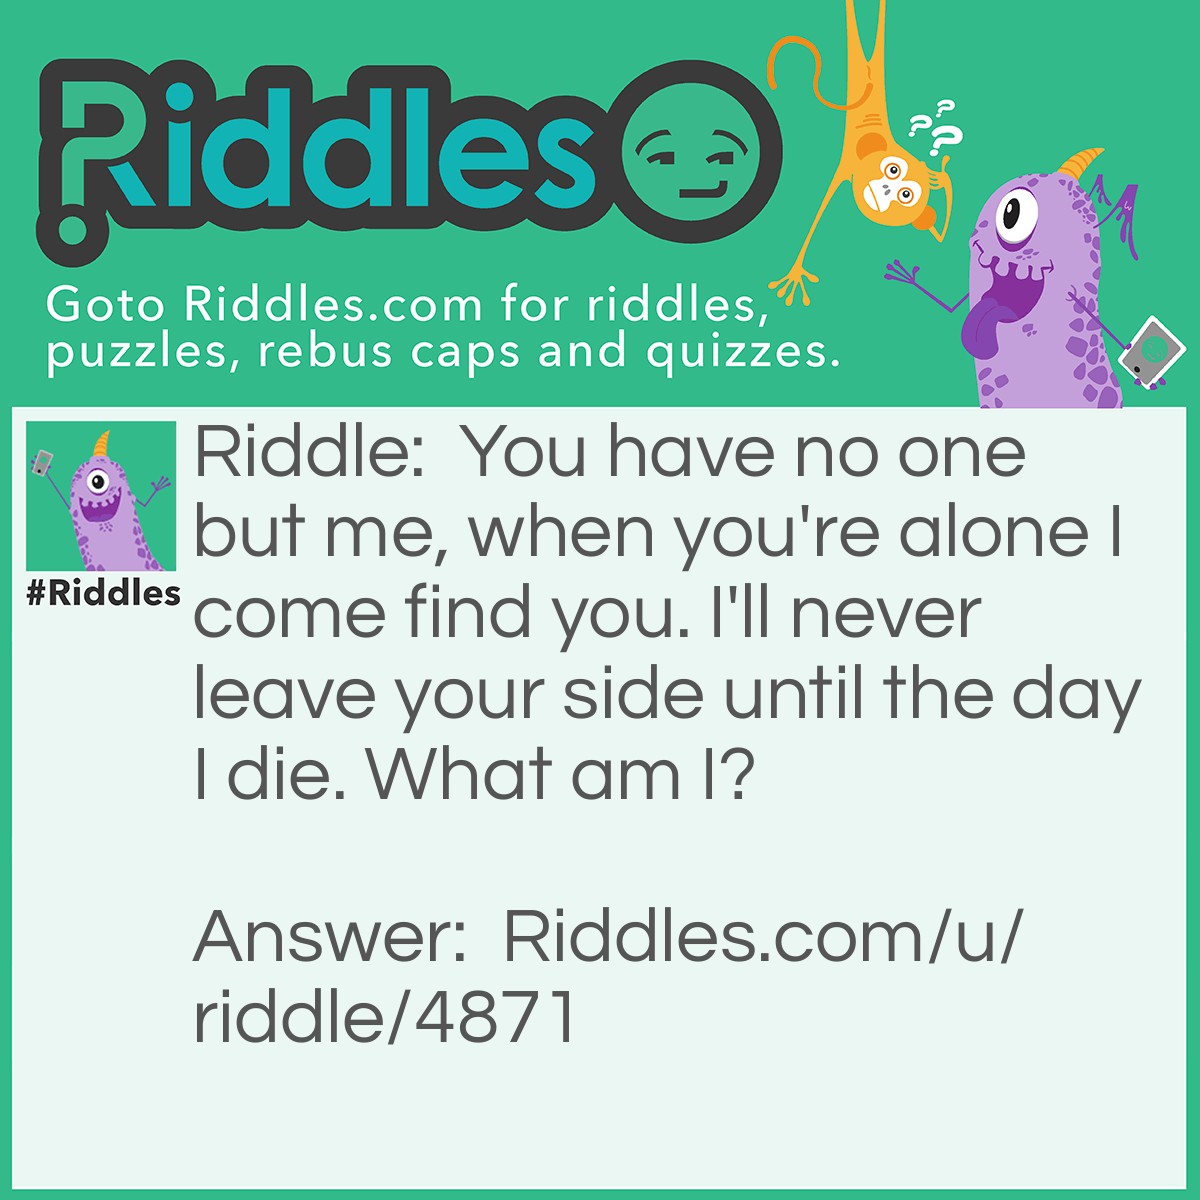 Riddle: You have no one but me, when you're alone I come find you. I'll never leave your side until the day I die. What am I? Answer: Your friend.